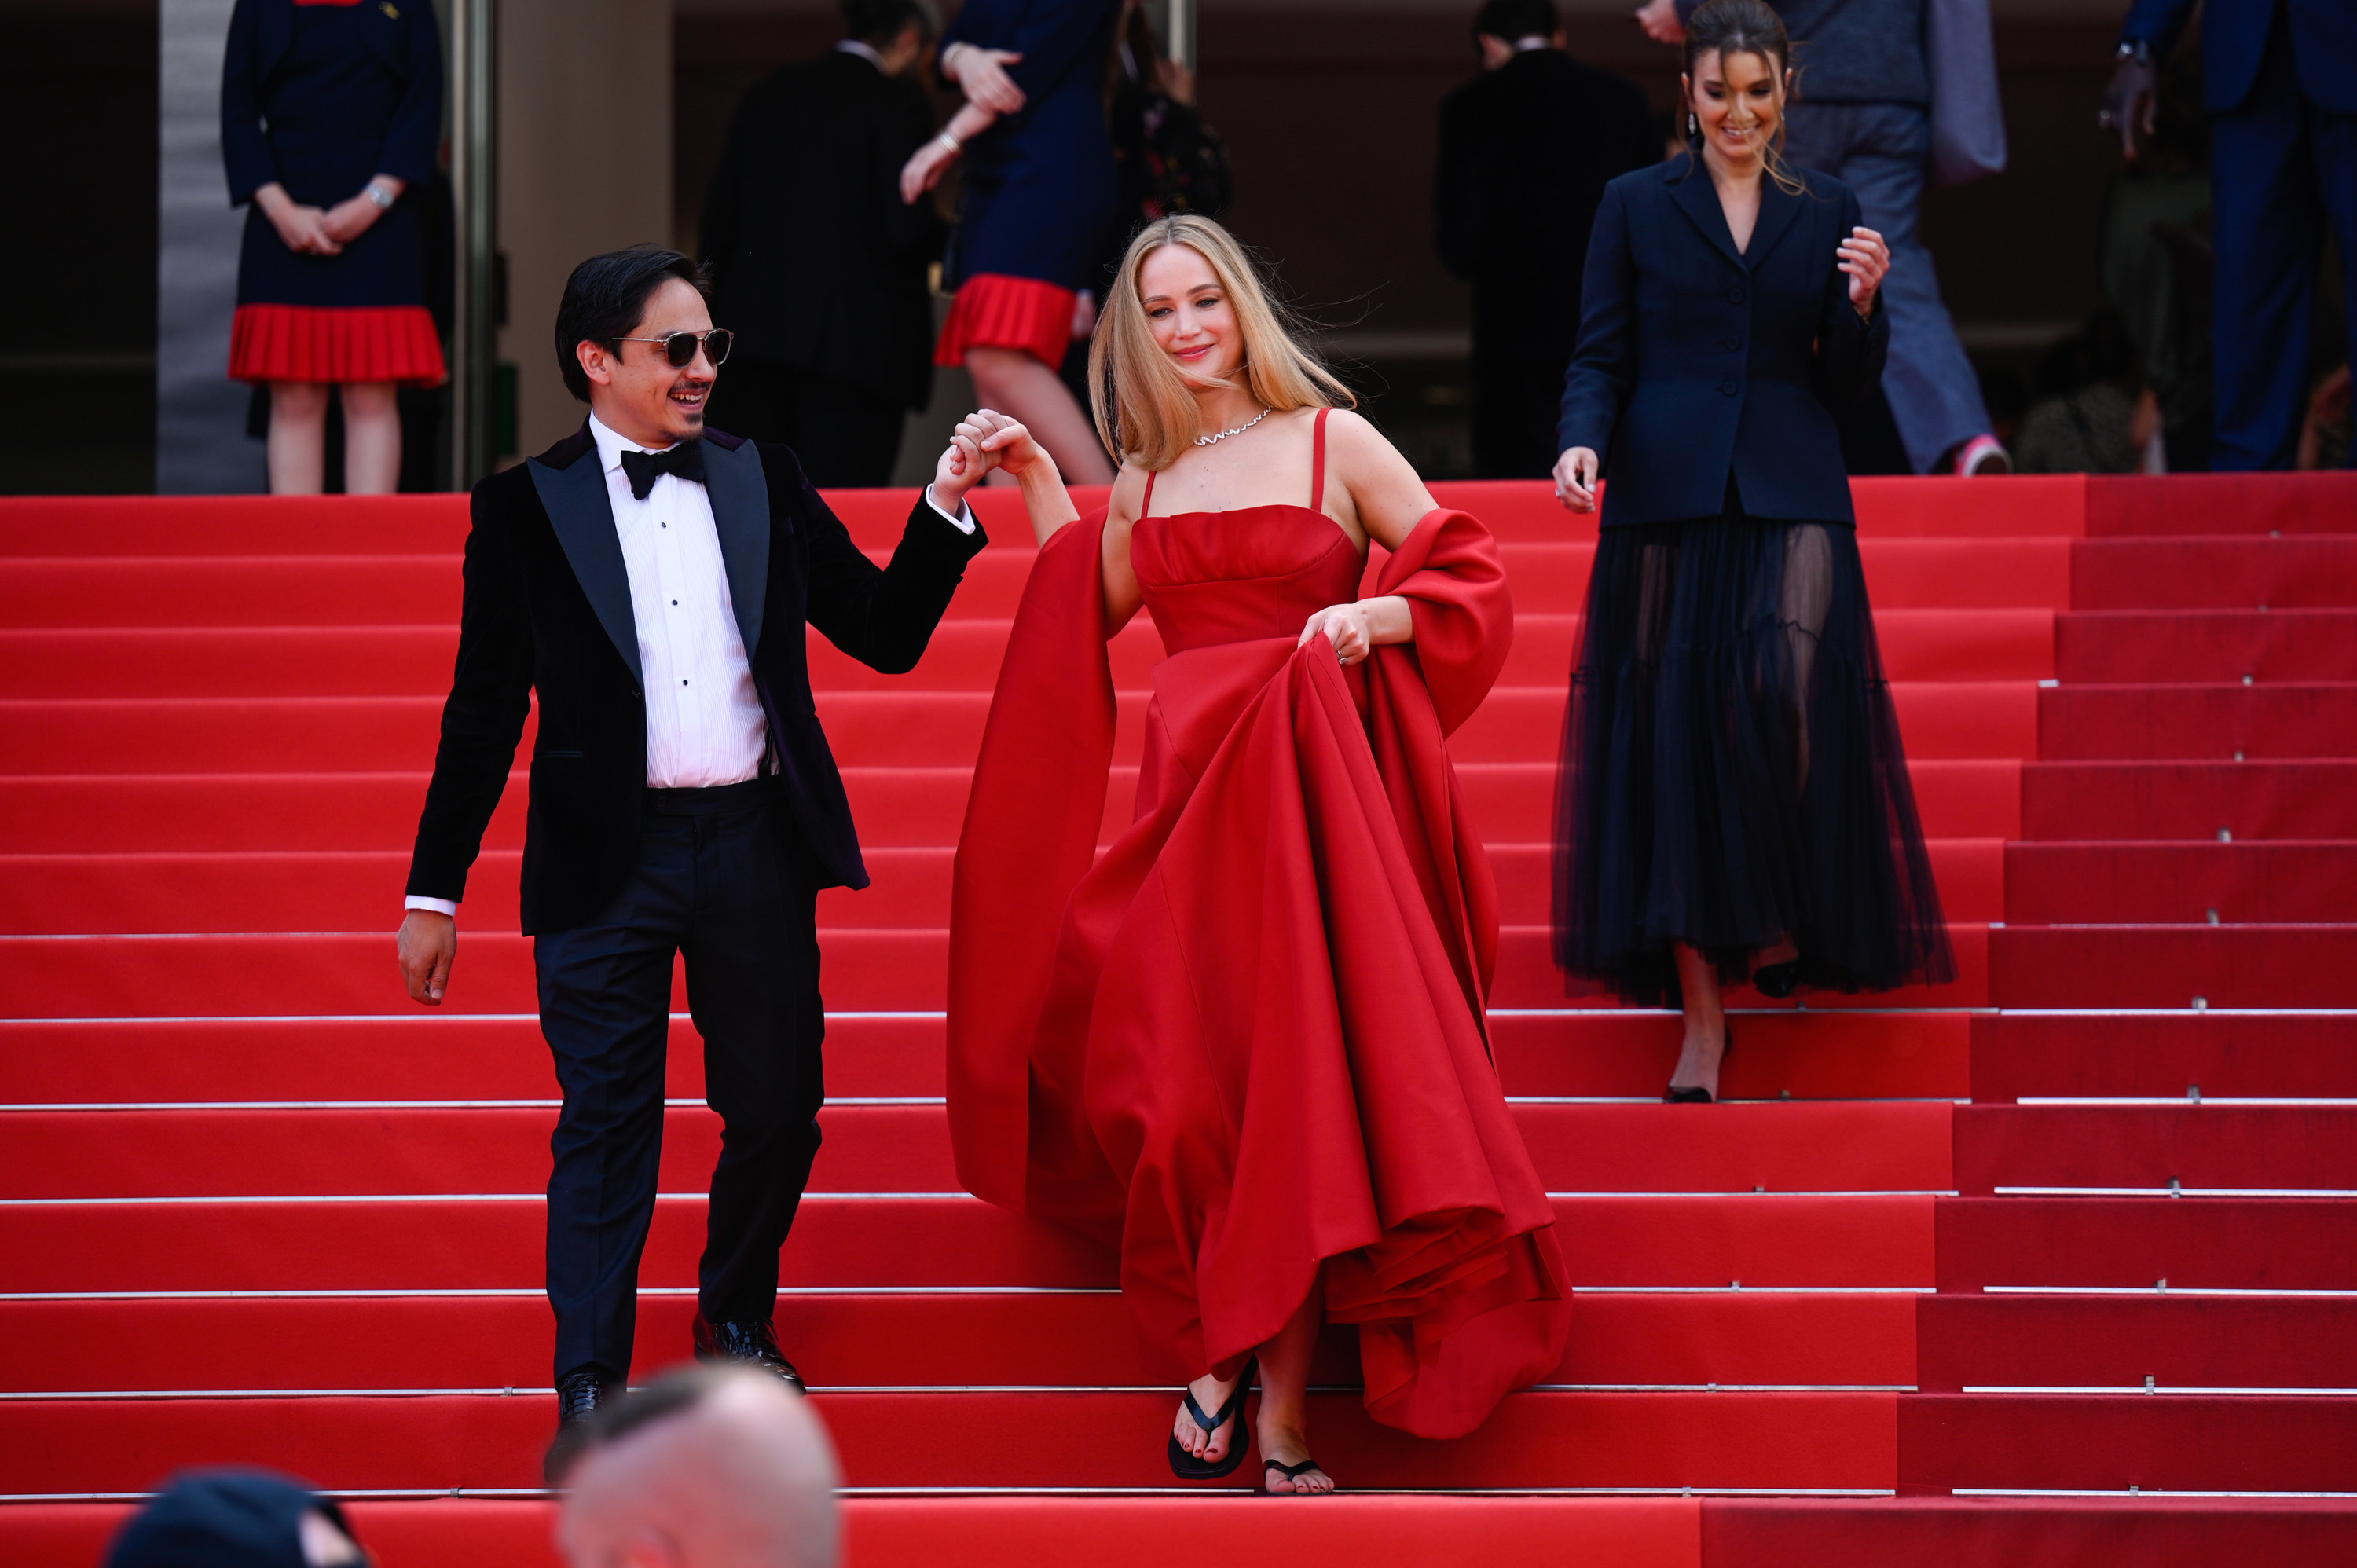 JLaw on the red carpet stairs raising her spaghetti-strap red gown to show black flip-flops